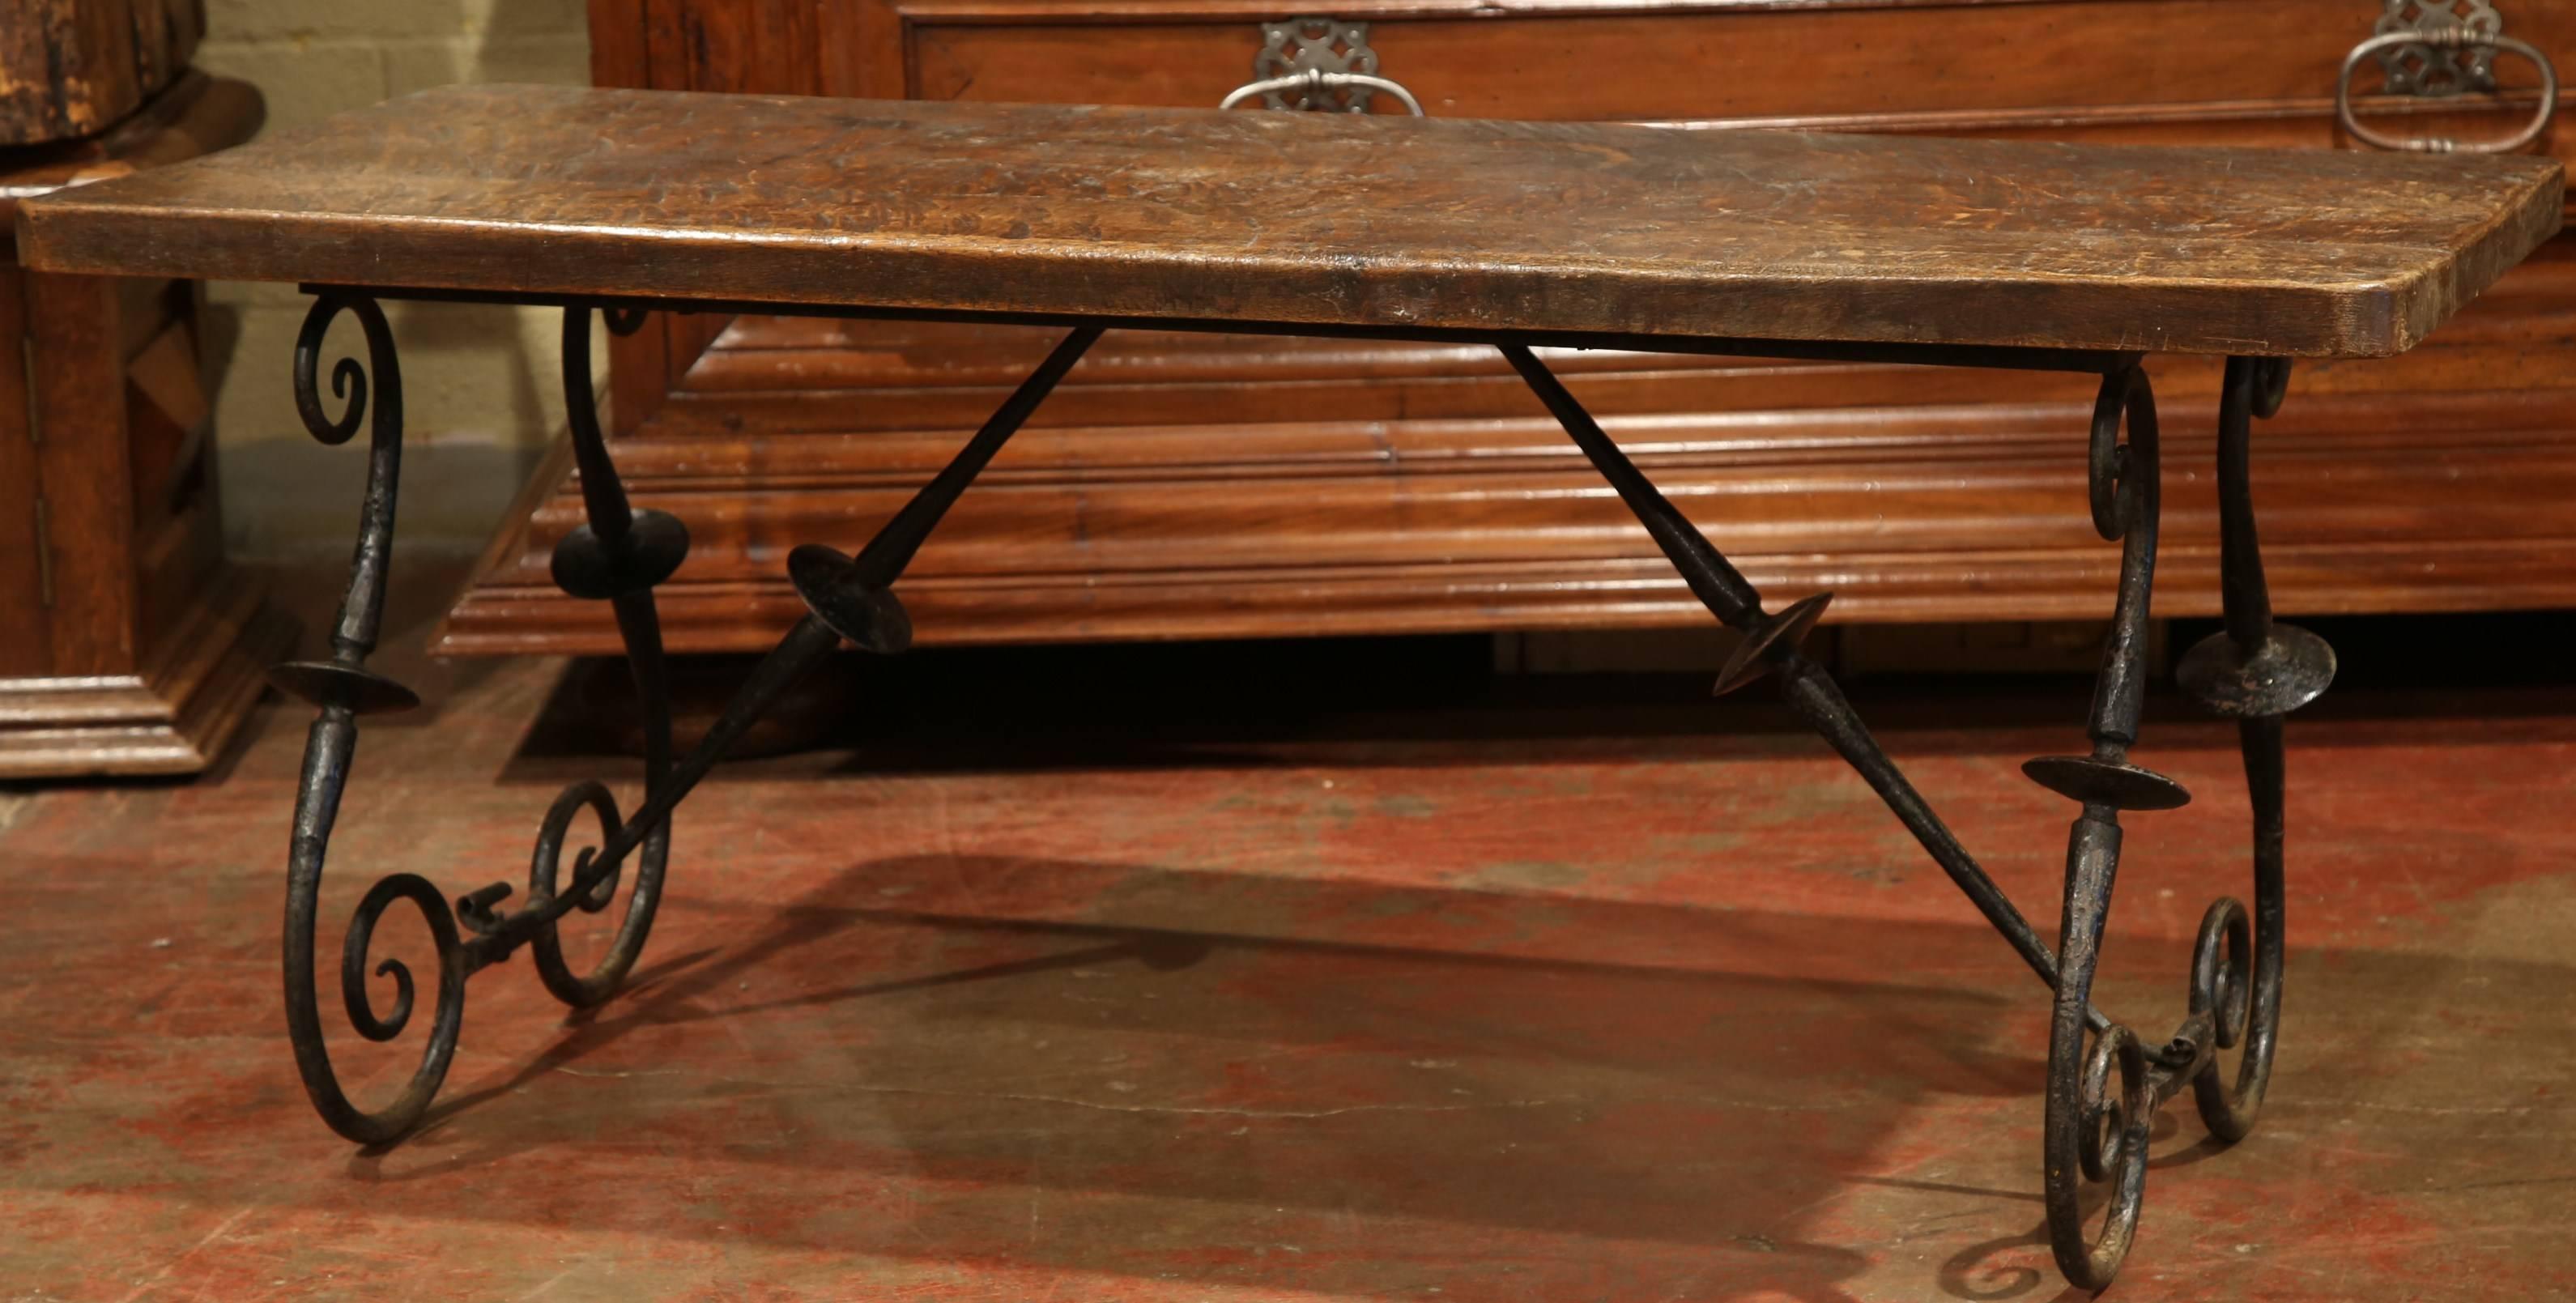 Hand-Carved 19th Century Spanish Walnut Coffee Table with Iron Legs and Stretcher